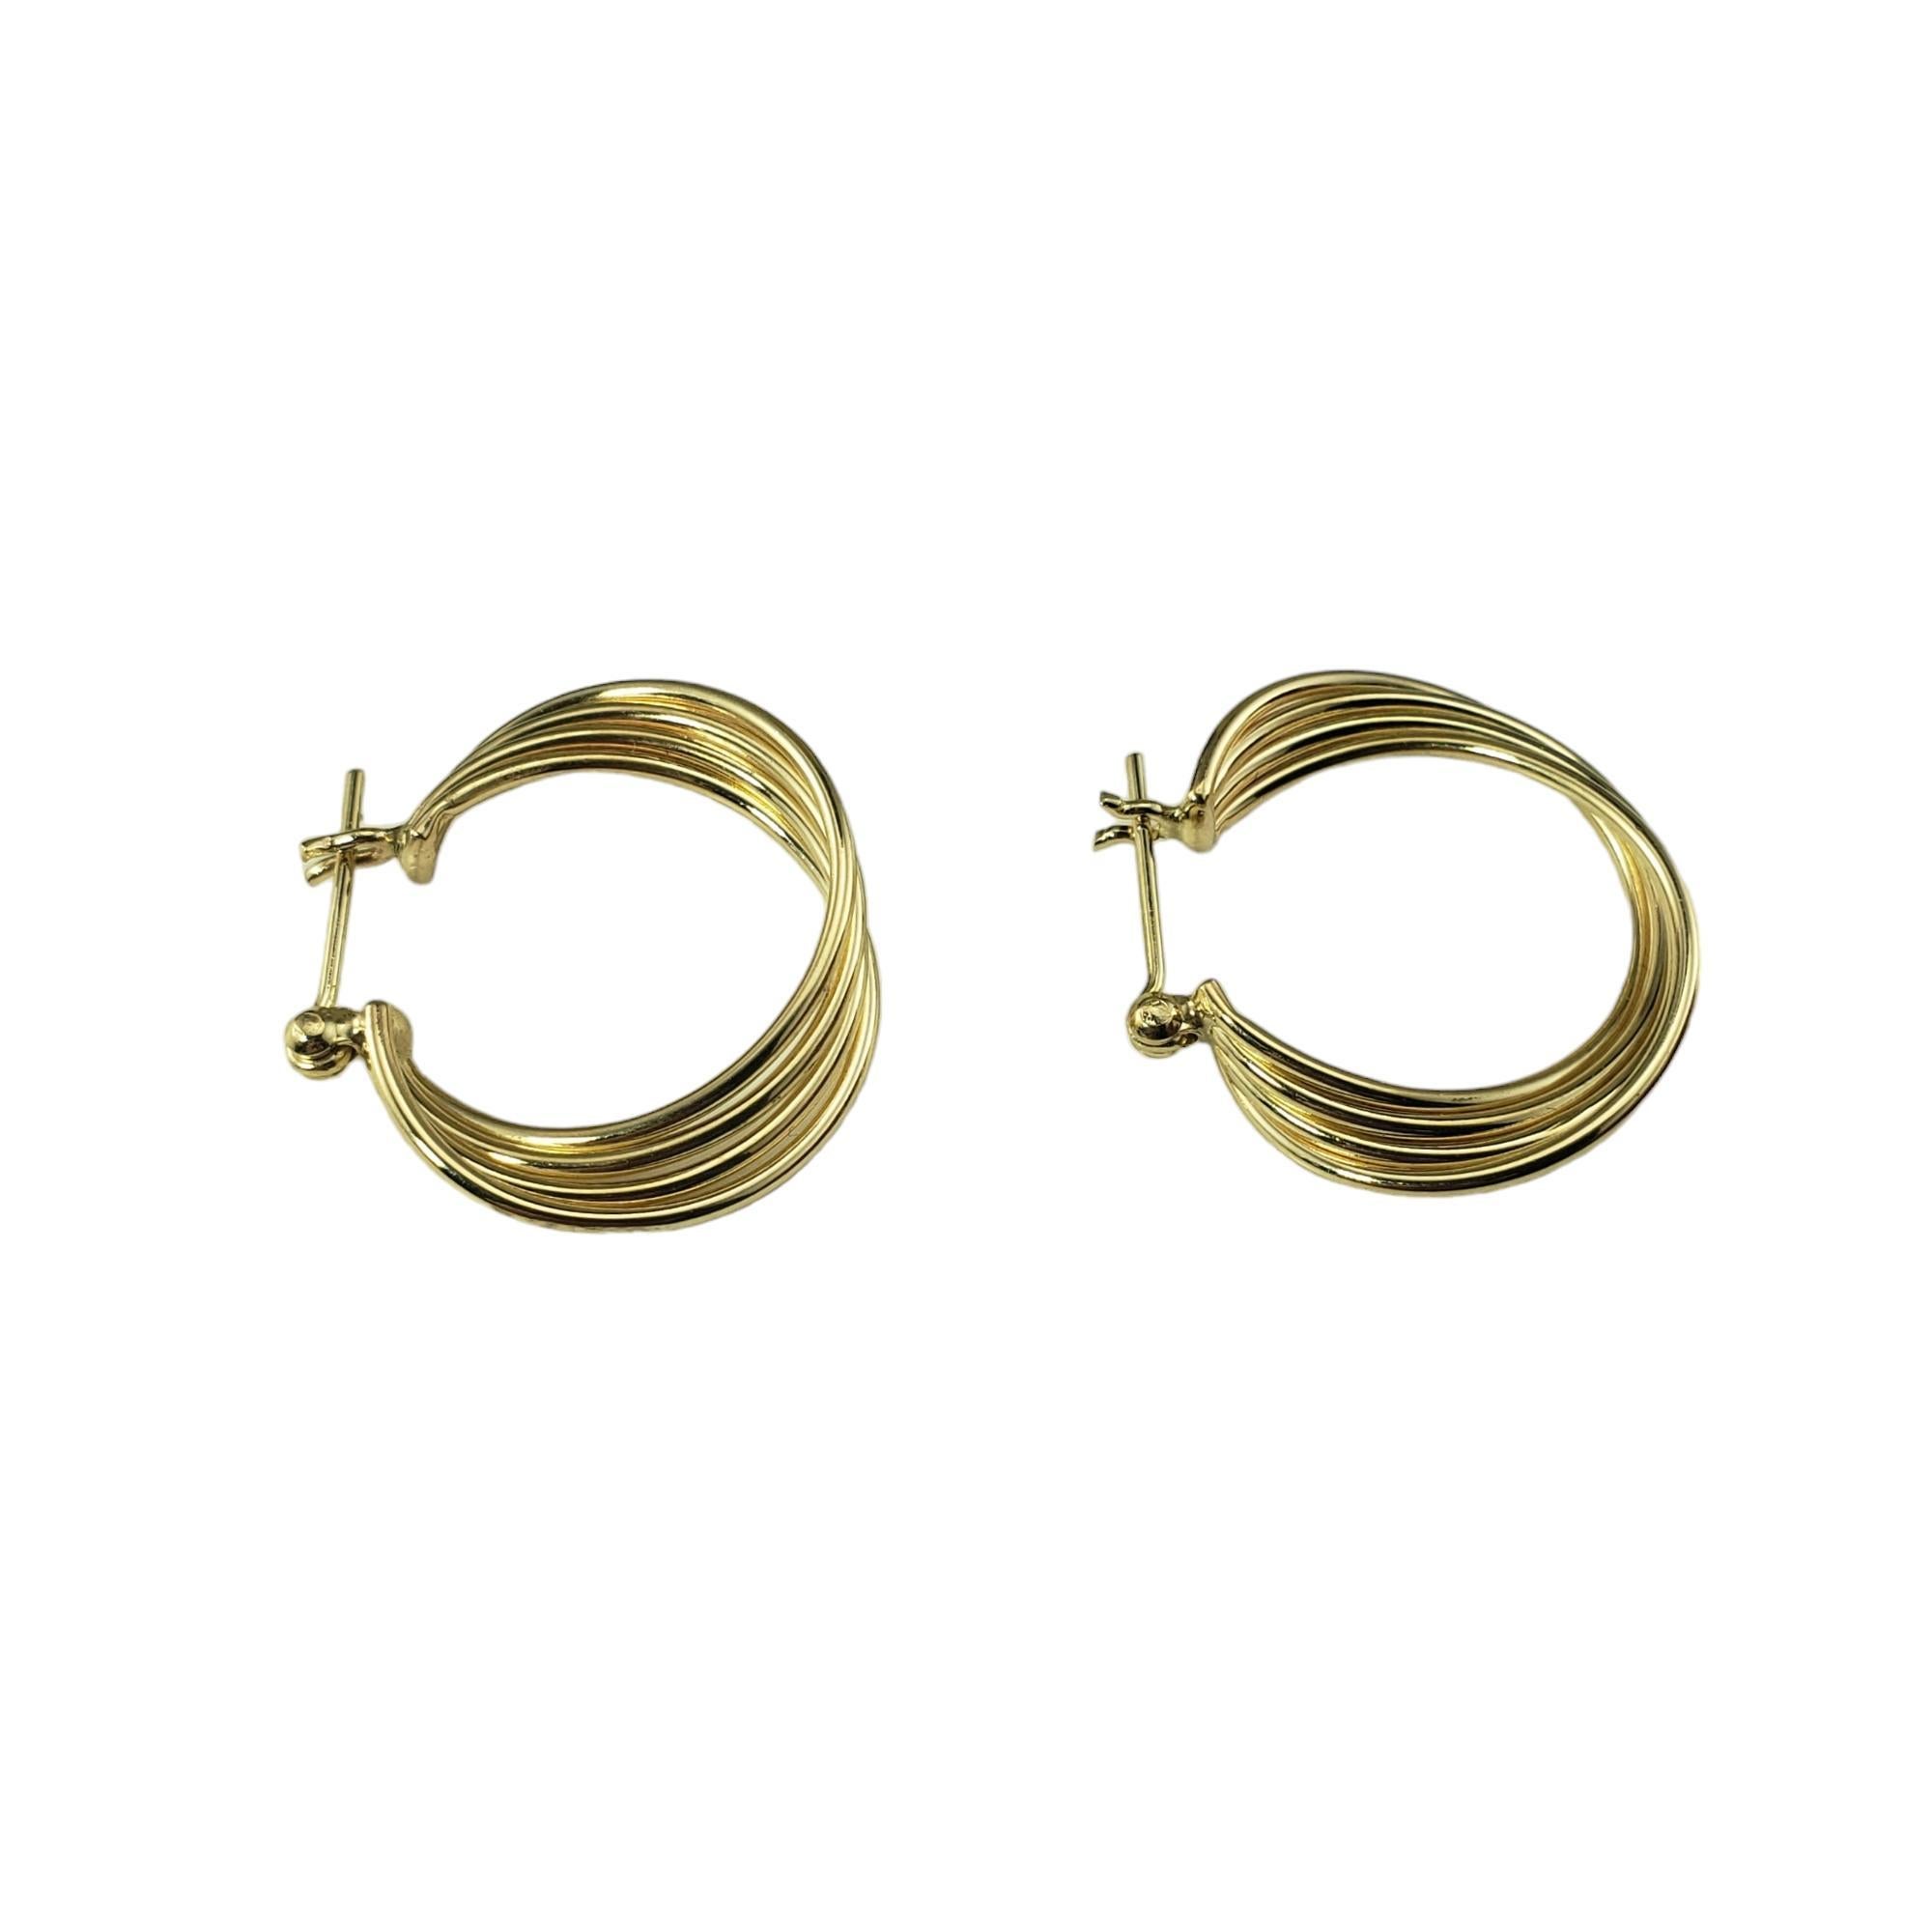 14 Karat Yellow Gold Twist Hoop Earrings

These lovely twist hoop earrings are crafted in meticulously detailed 14K yellow gold. 

Width: 4 mm.

Size: 22 mm

Stamped: 14K

Weight: 1.6 dwt./2.4 gr.

Very good condition, professionally polished.

Will